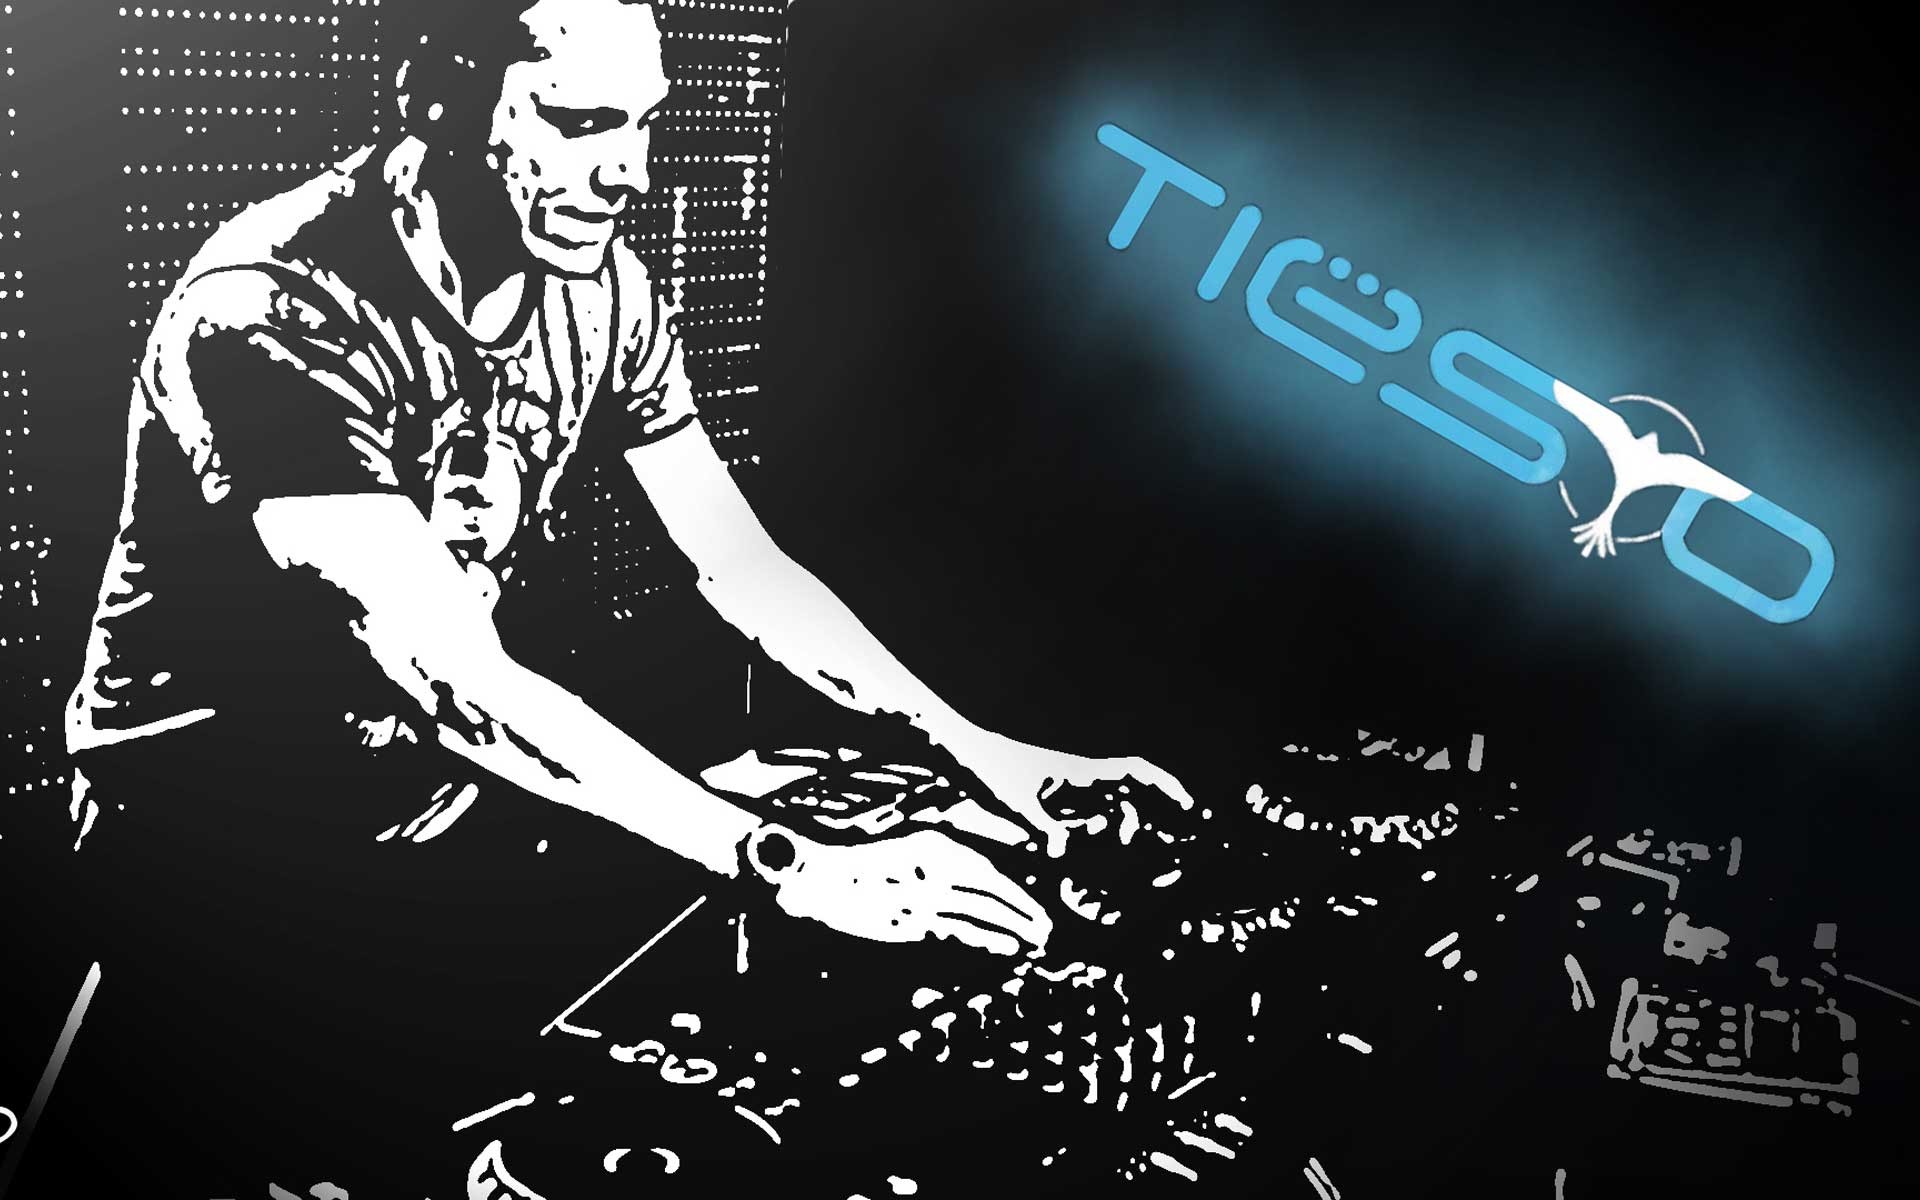 1920x1200 TiÃ«sto wallpapers | TiÃ«sto background - Page 2